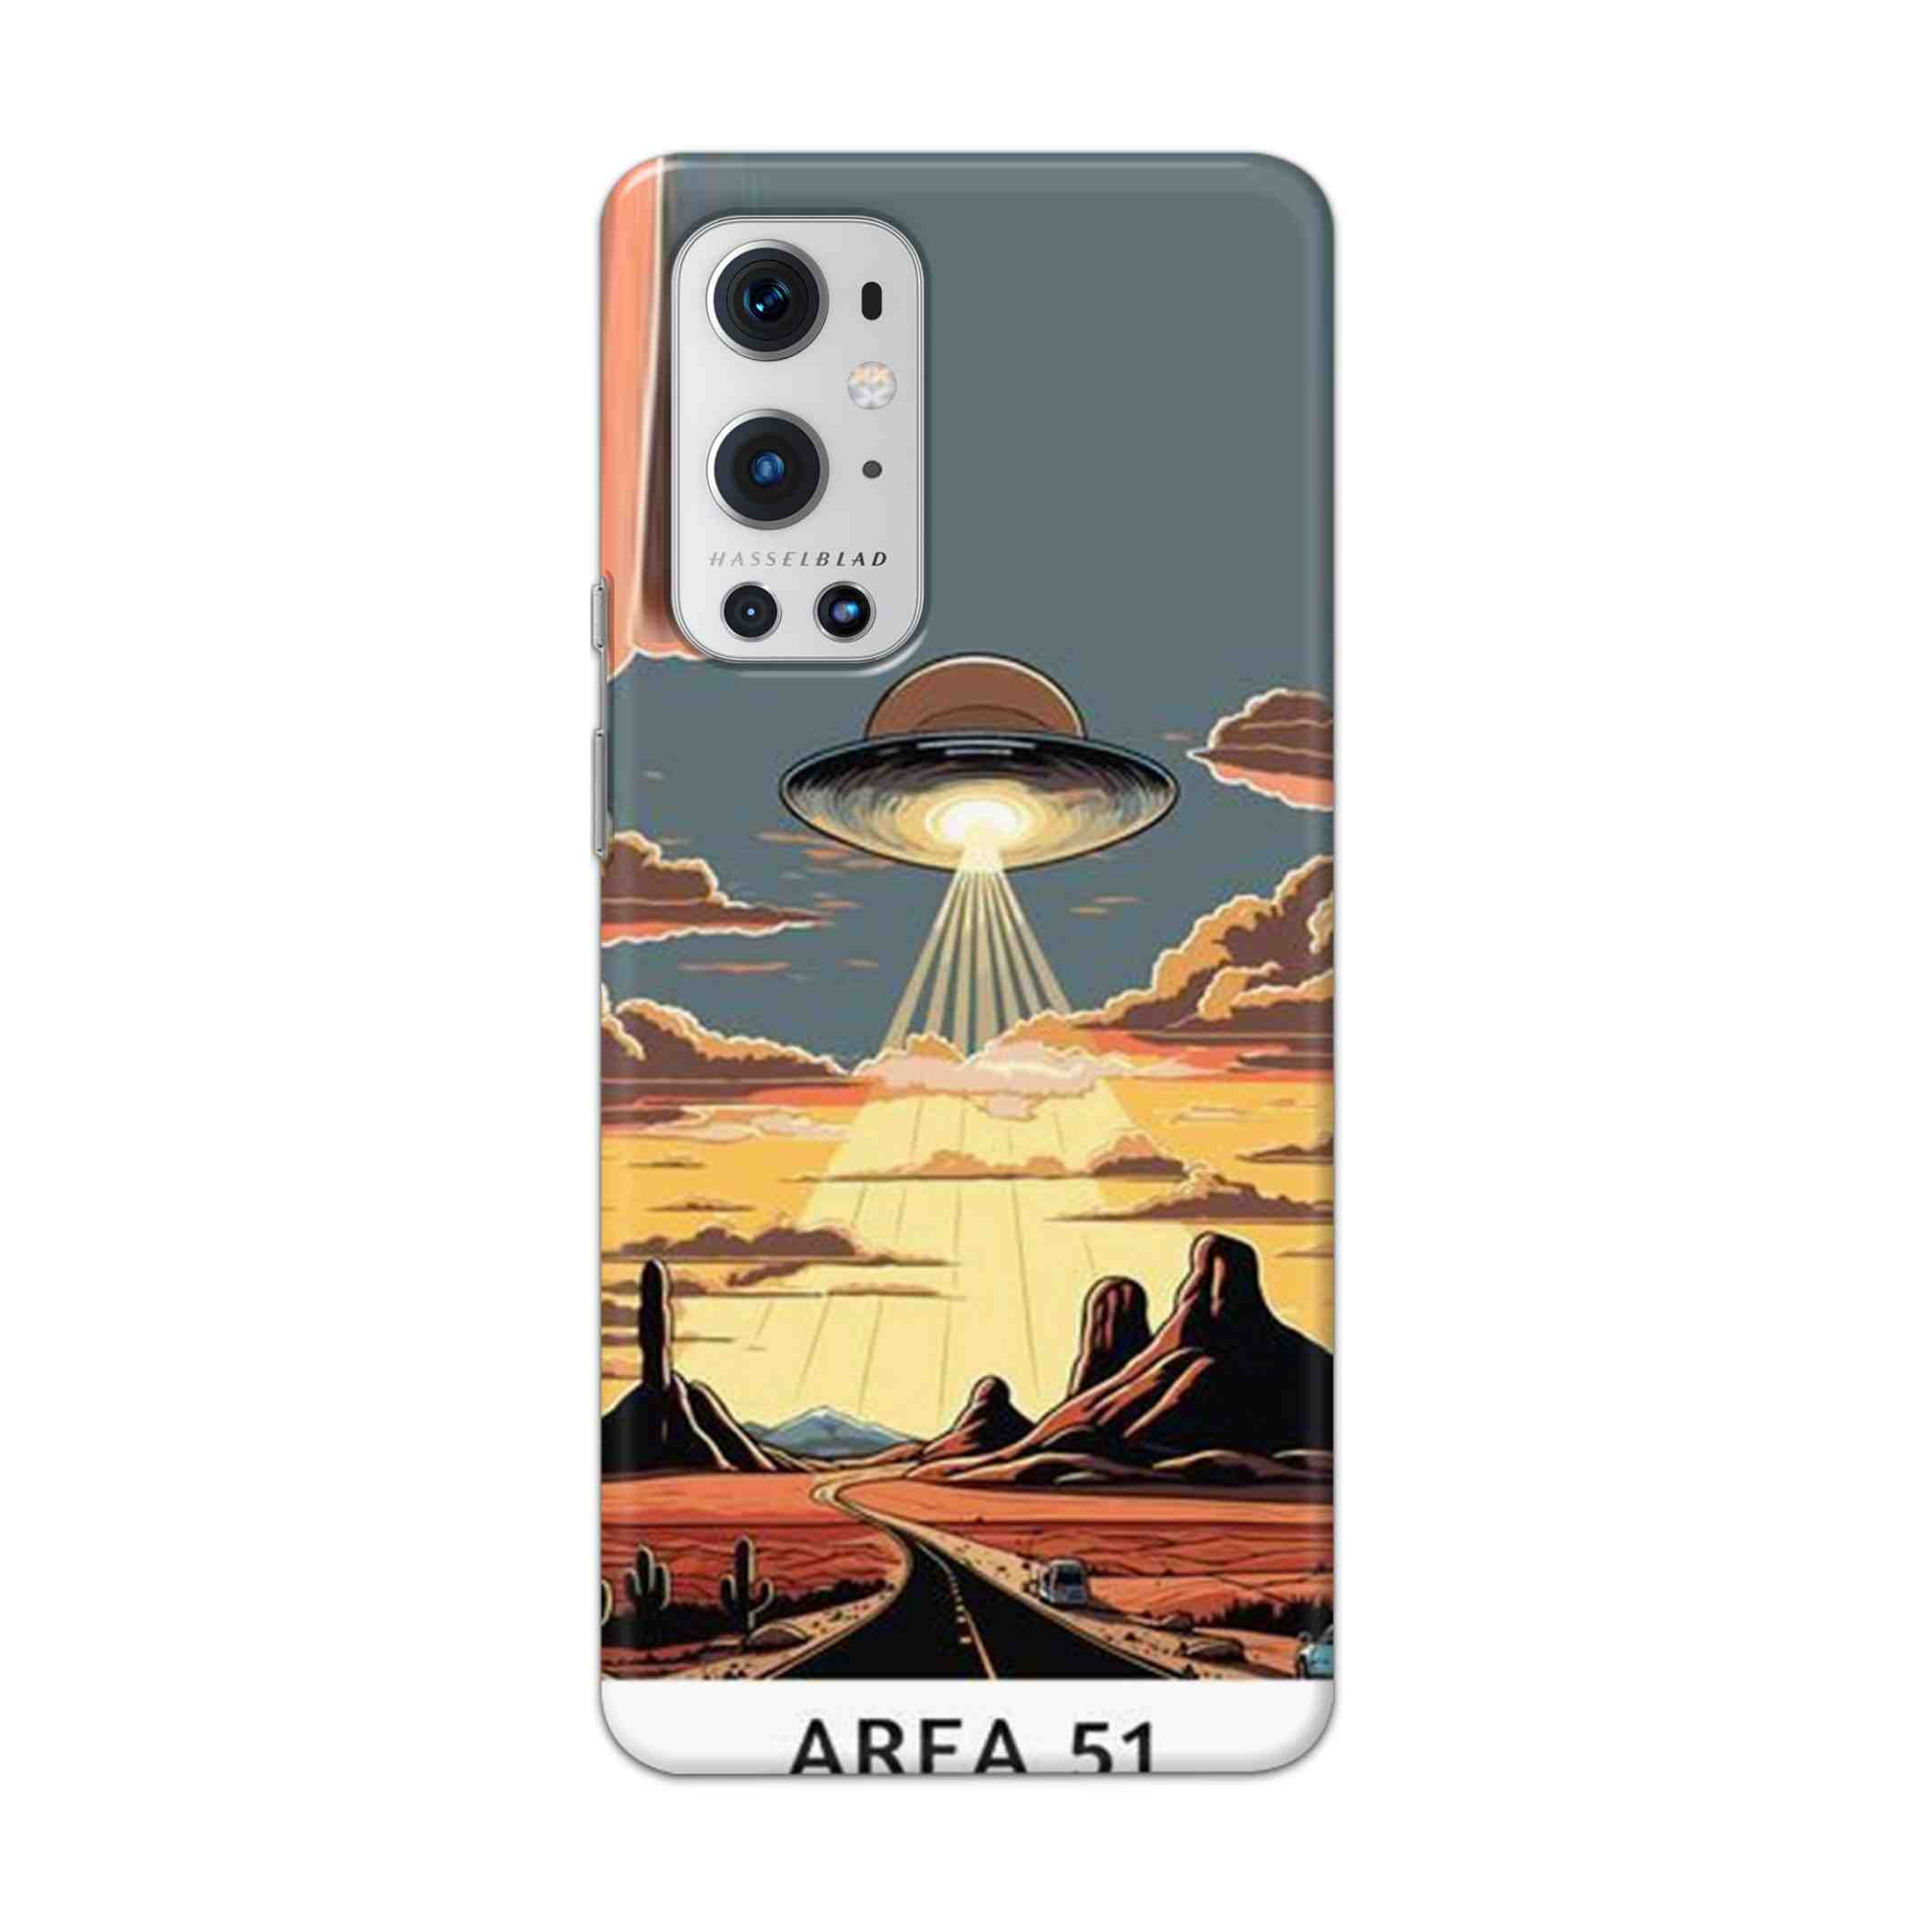 Buy Area 51 Hard Back Mobile Phone Case Cover For OnePlus 9 Pro Online